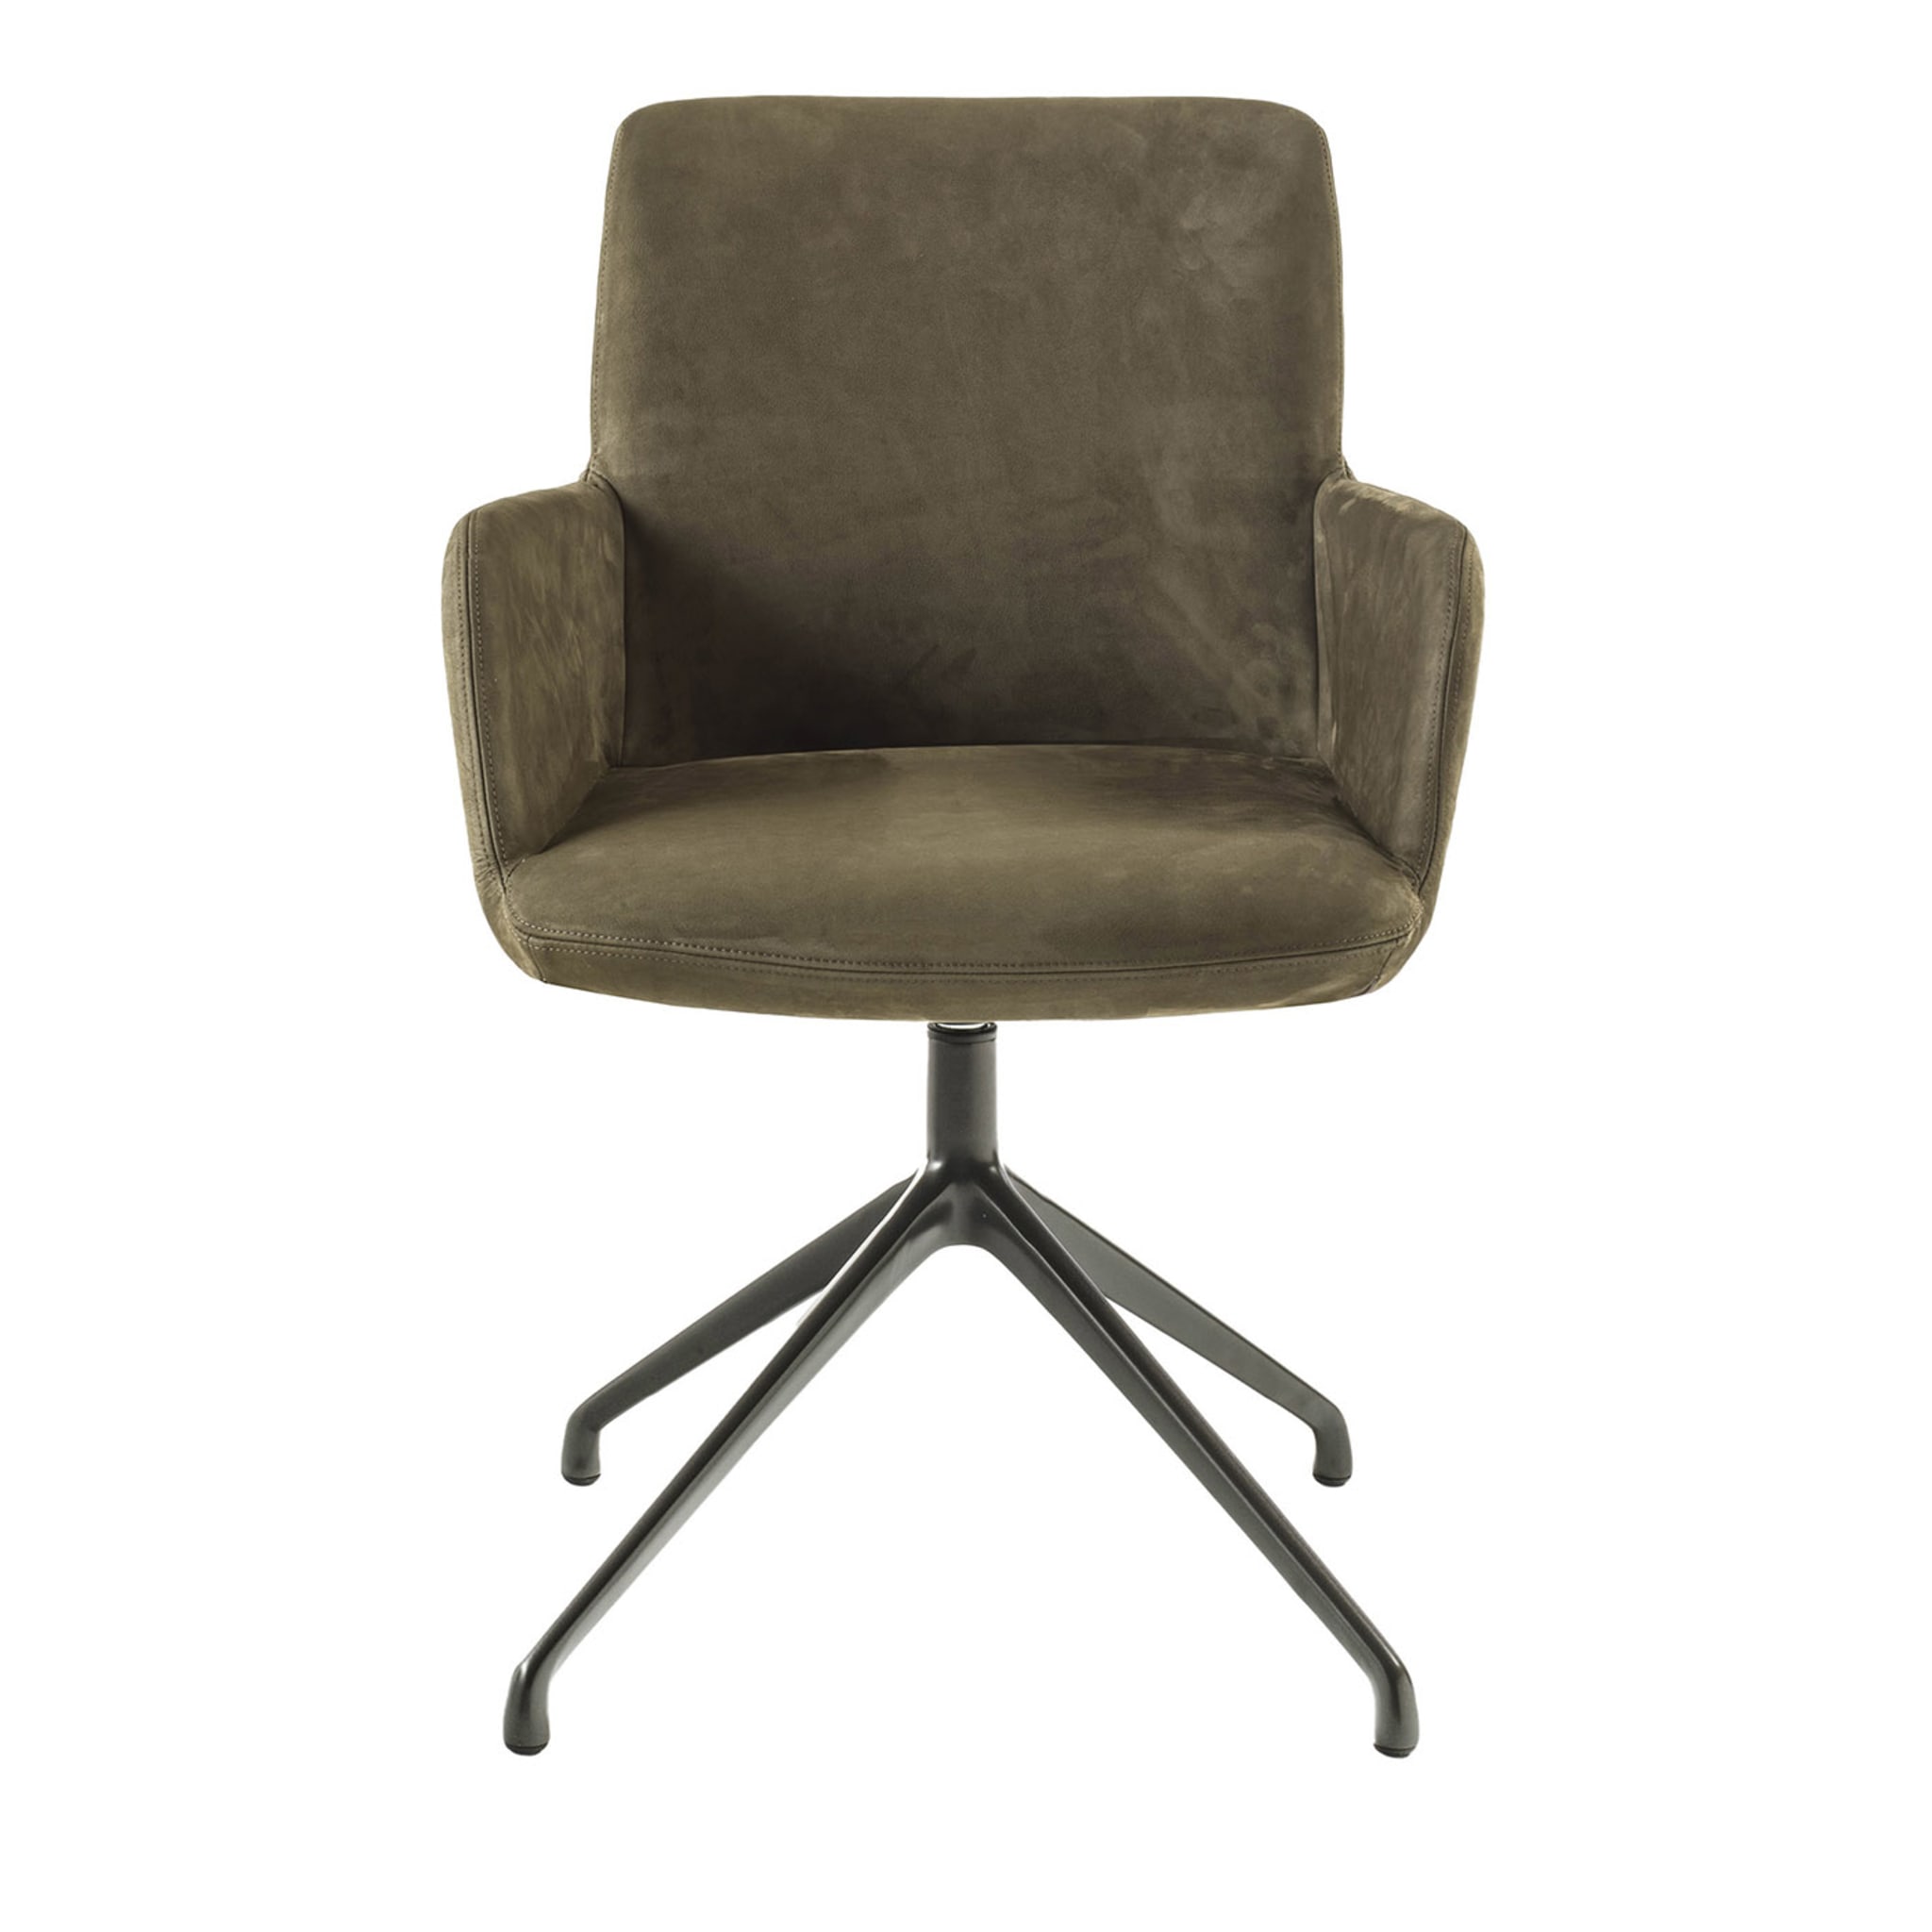 Materia Soft Swivel Sage-Green Chair With Armrests by Claudio Bellini - Main view